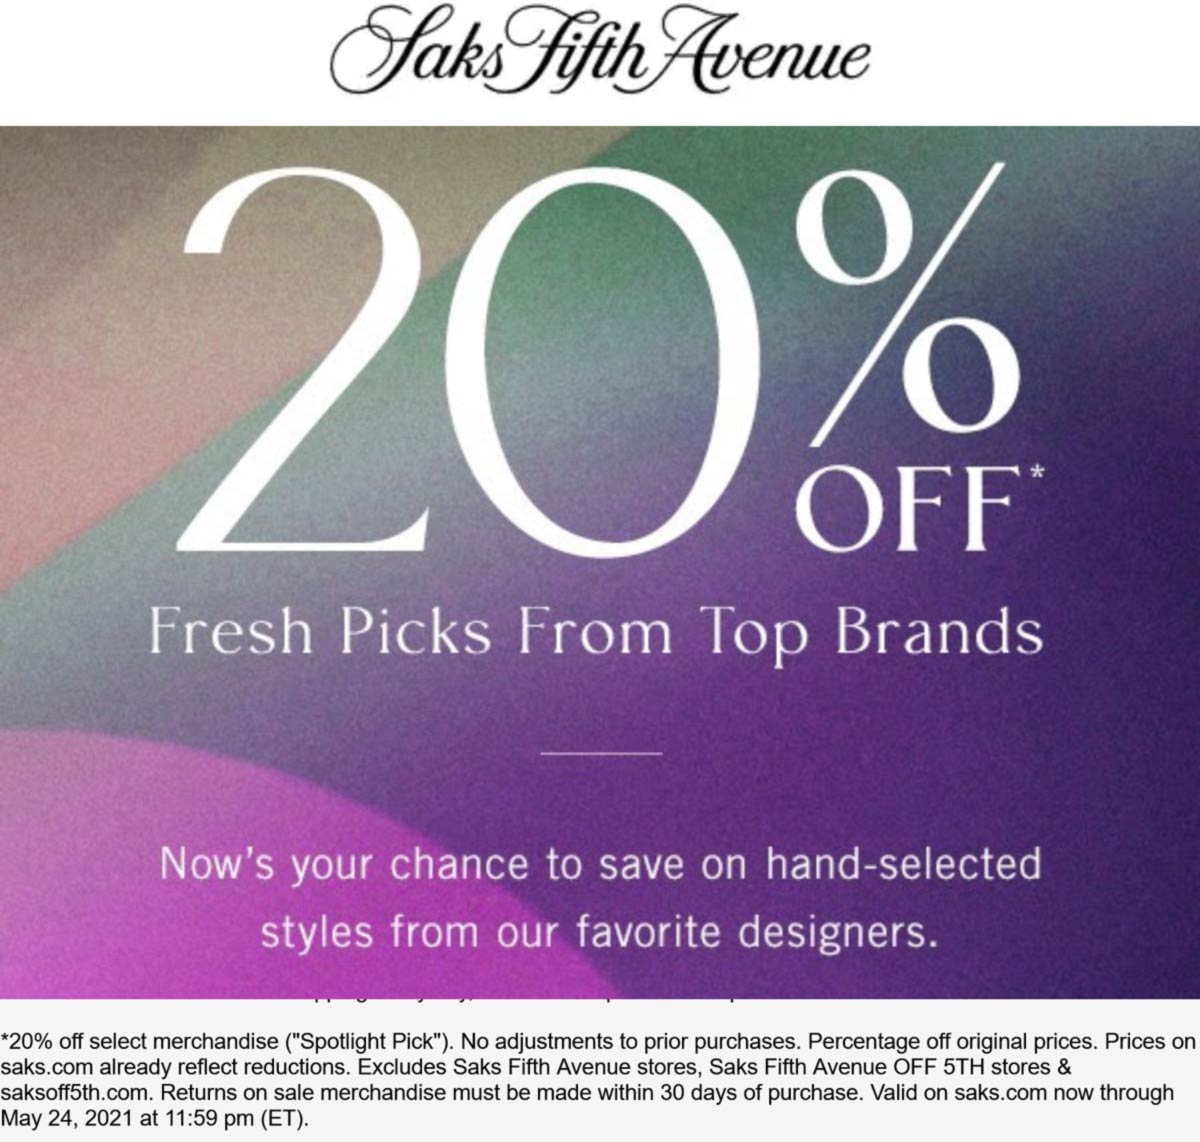 Saks Fifth Avenue stores Coupon  20% off various designers online today at Saks Fifth Avenue #saksfifthavenue 